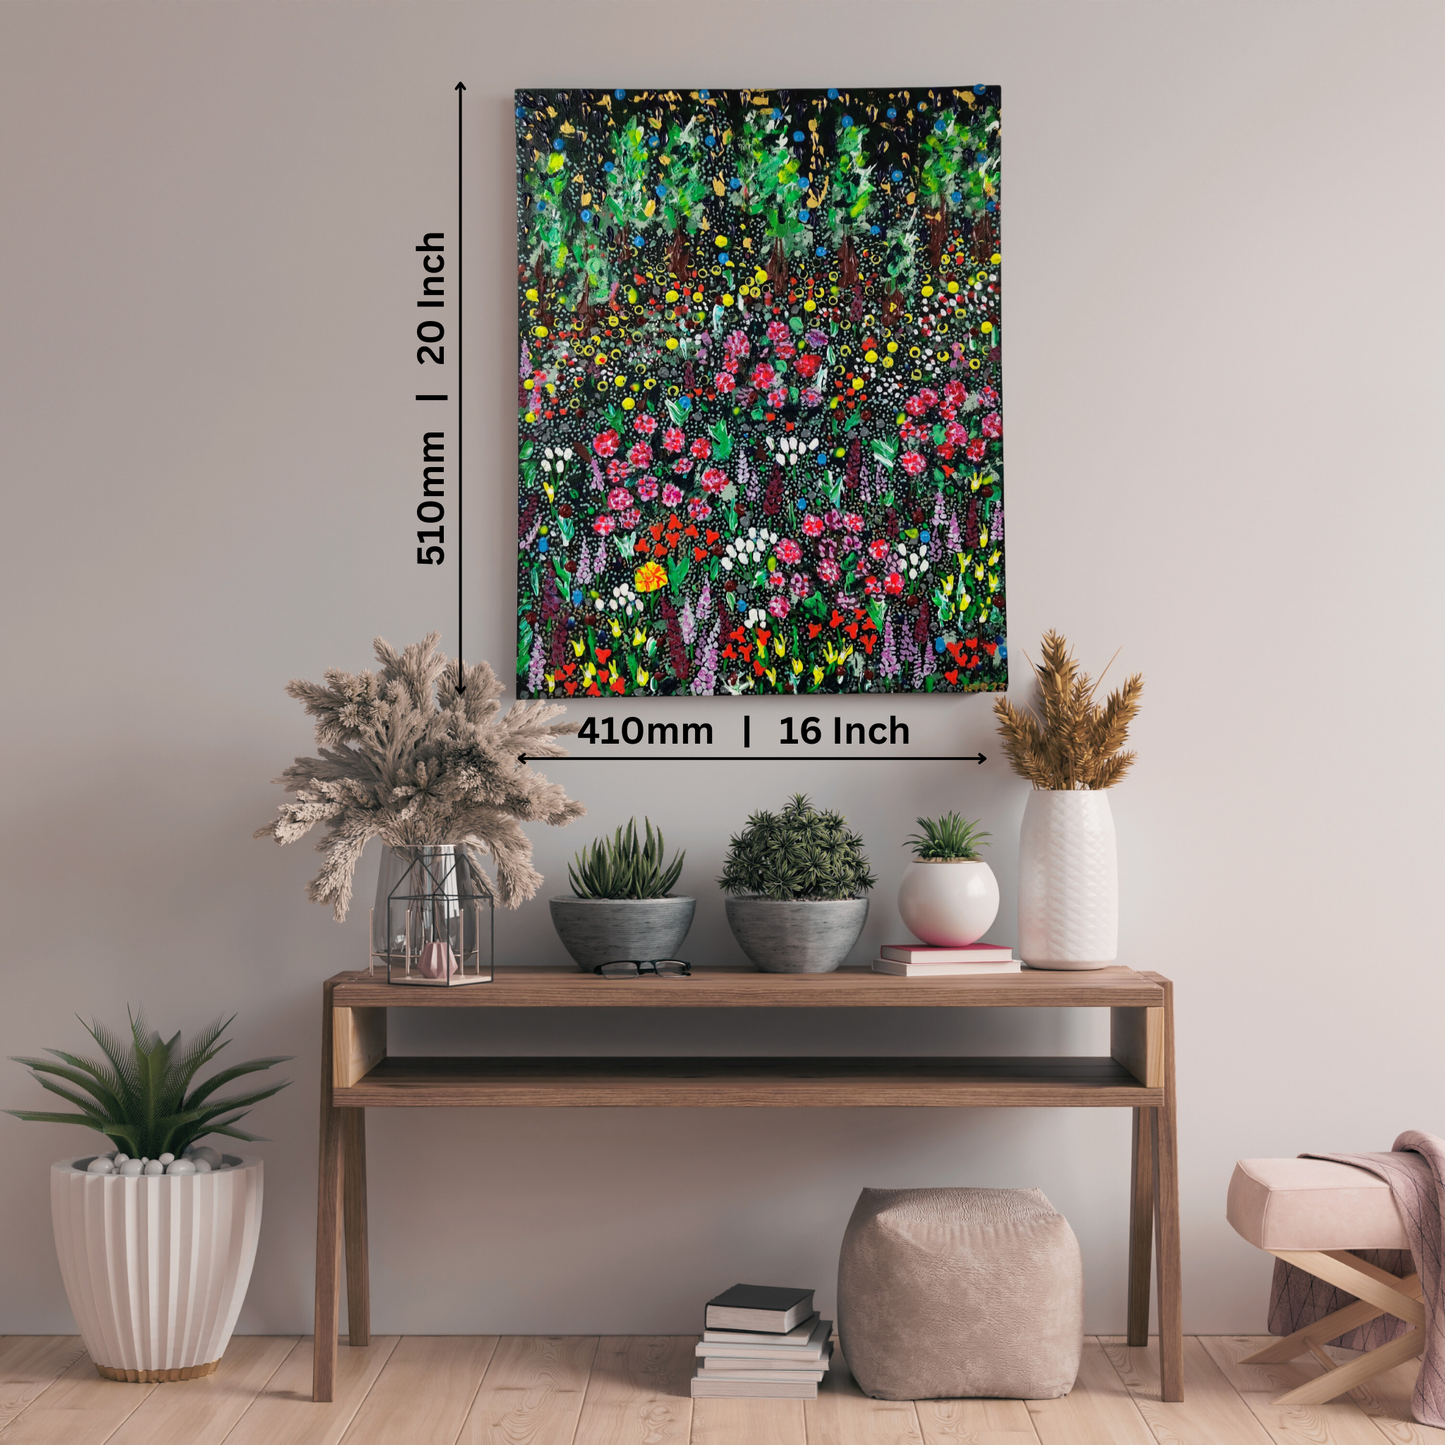 Enchanted Forest Acrylic Painting on Canvas